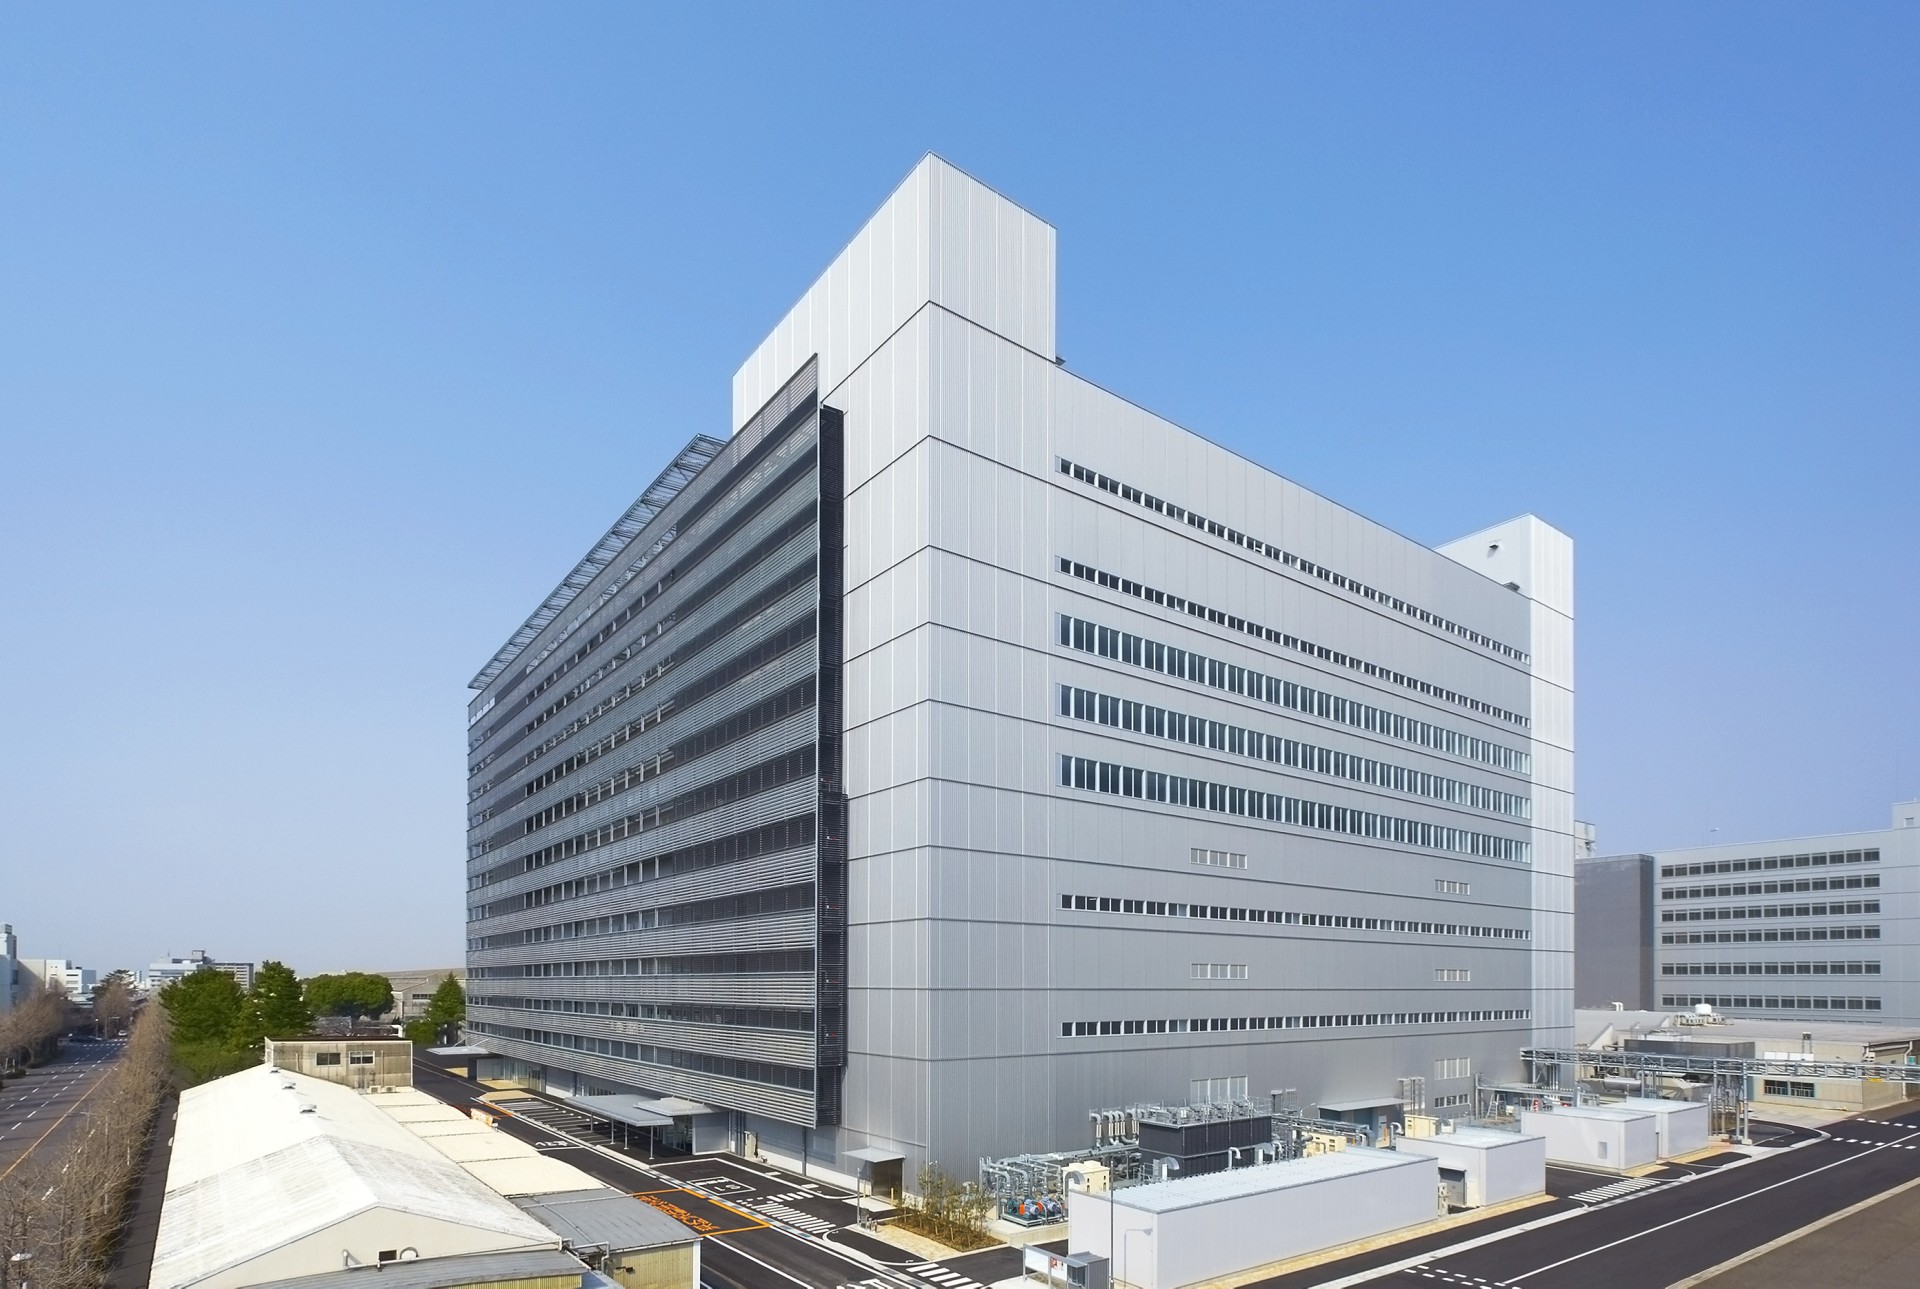 Toyota's Powertrain Development and Production Engineering Building